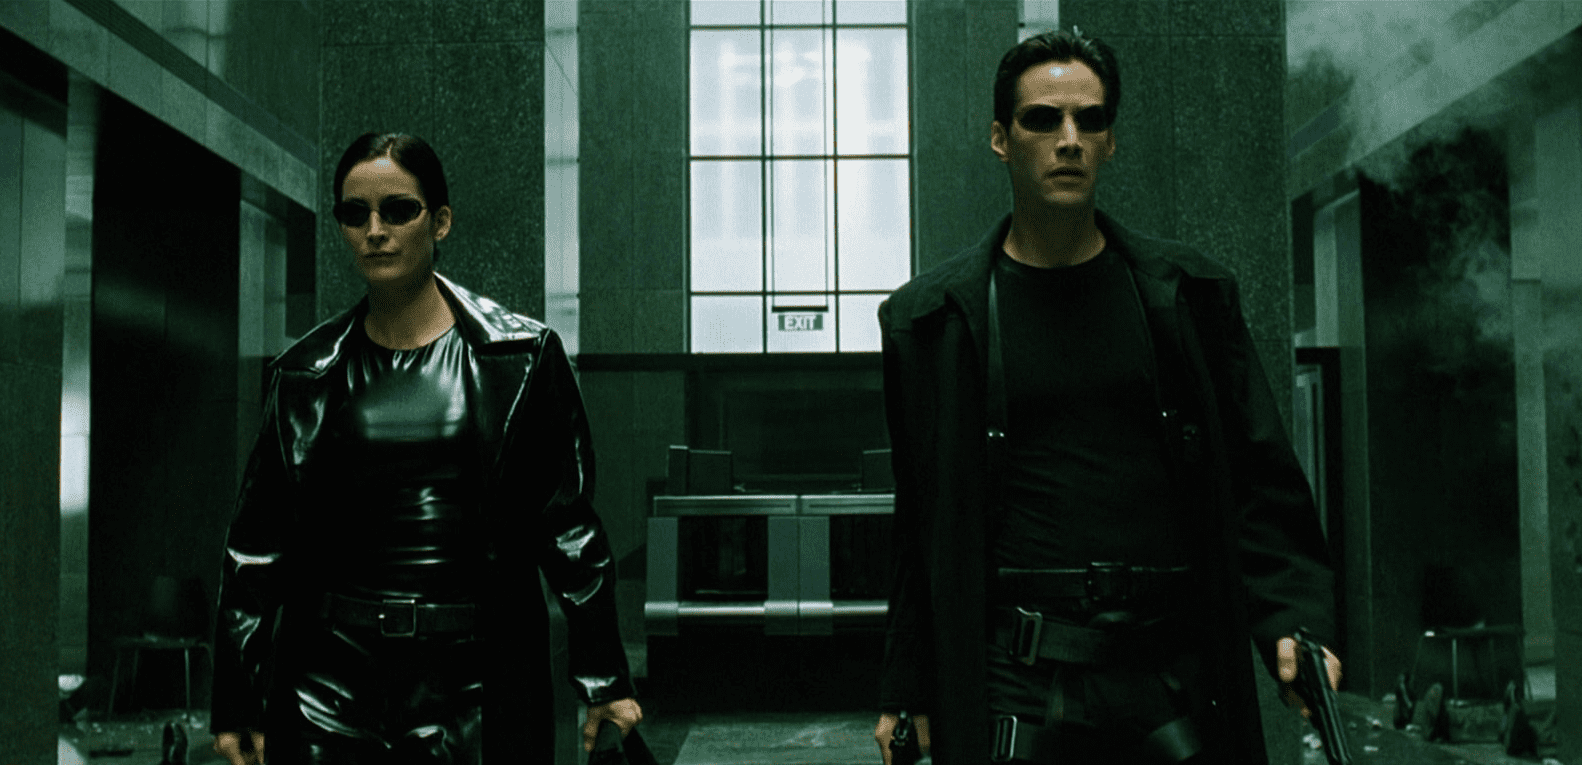 Carrie-Anne Moss and Keanu Reeves in “The Matrix”